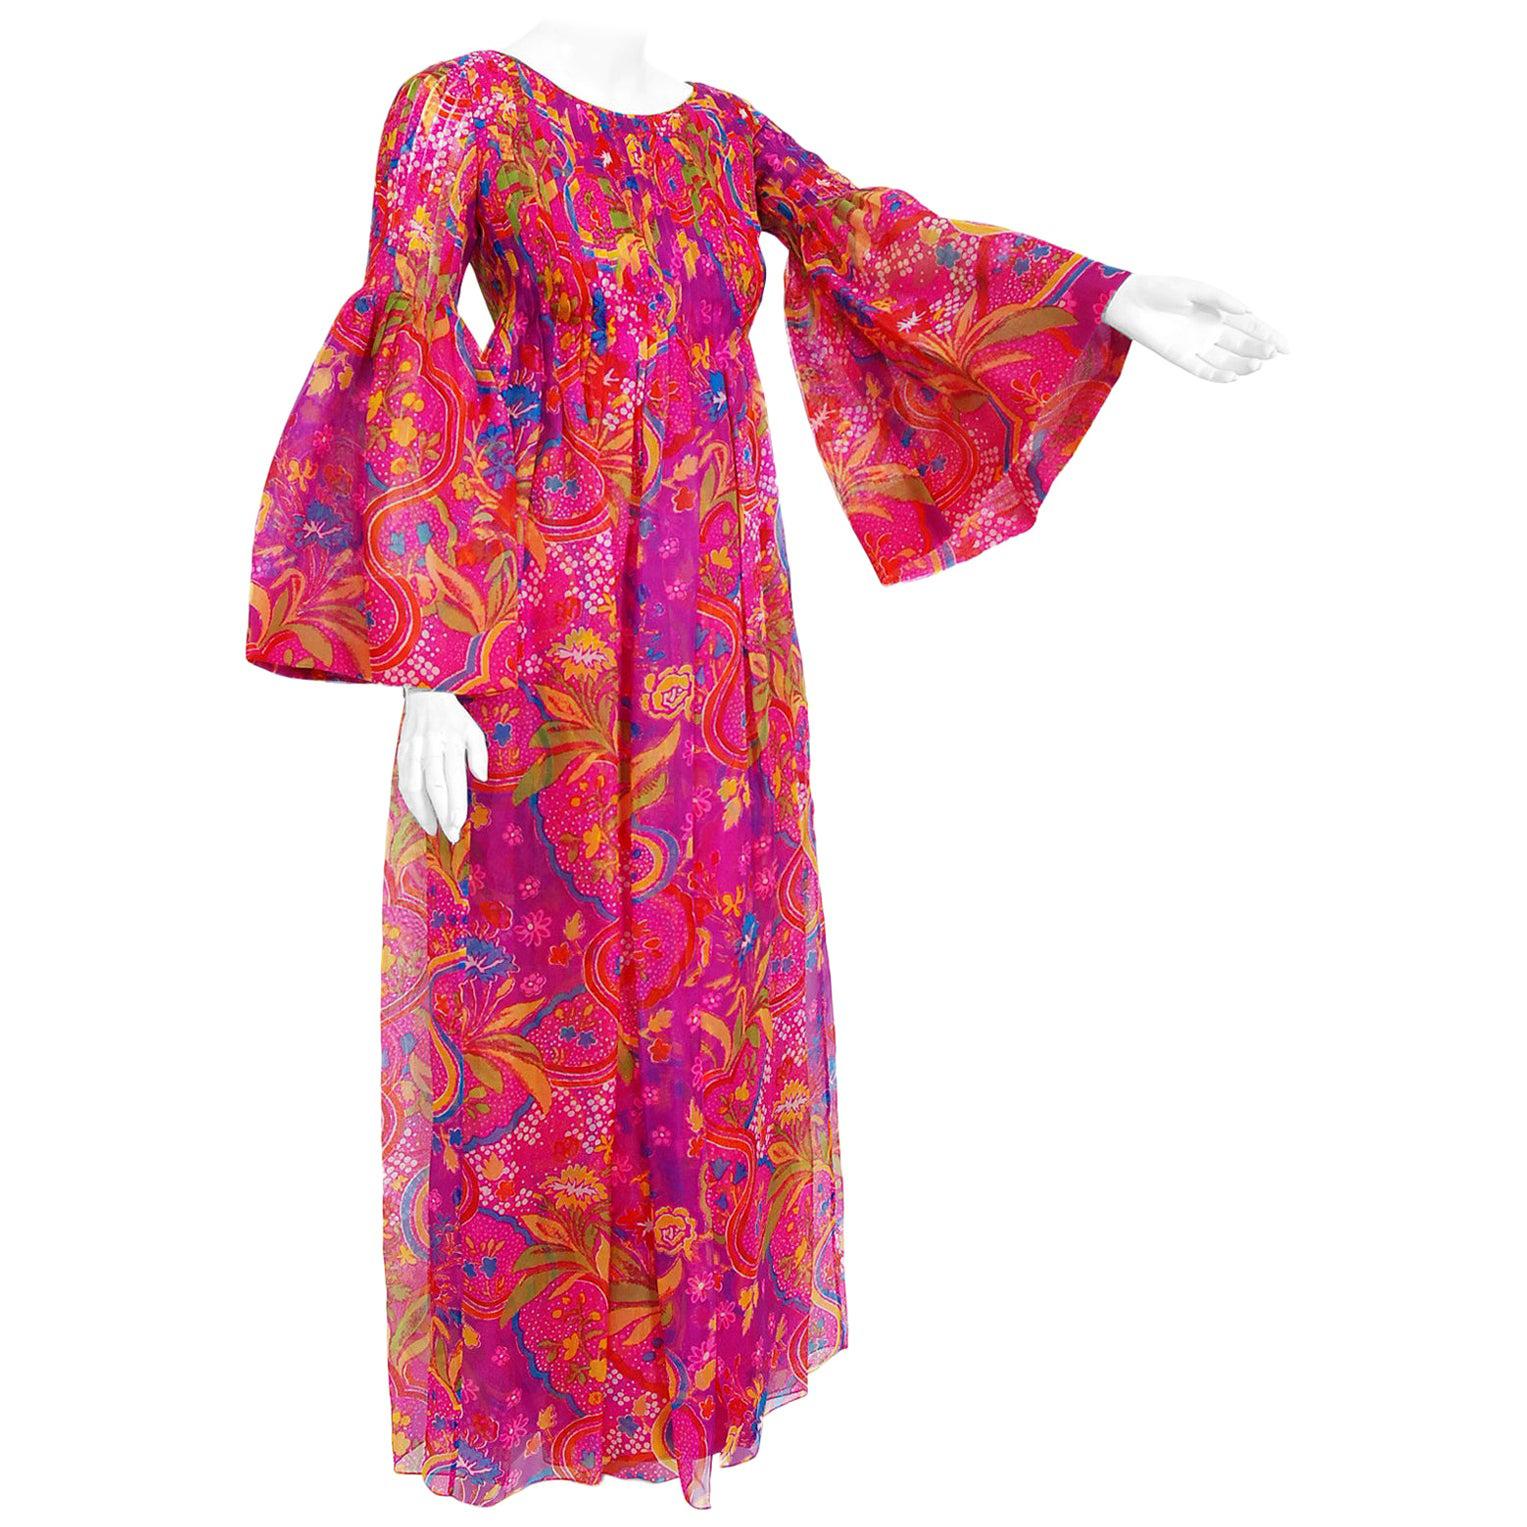 Vintage 1969 Pierre Cardin Pink Psychedelic Print Organza Bell-Sleeve Maxi Dress